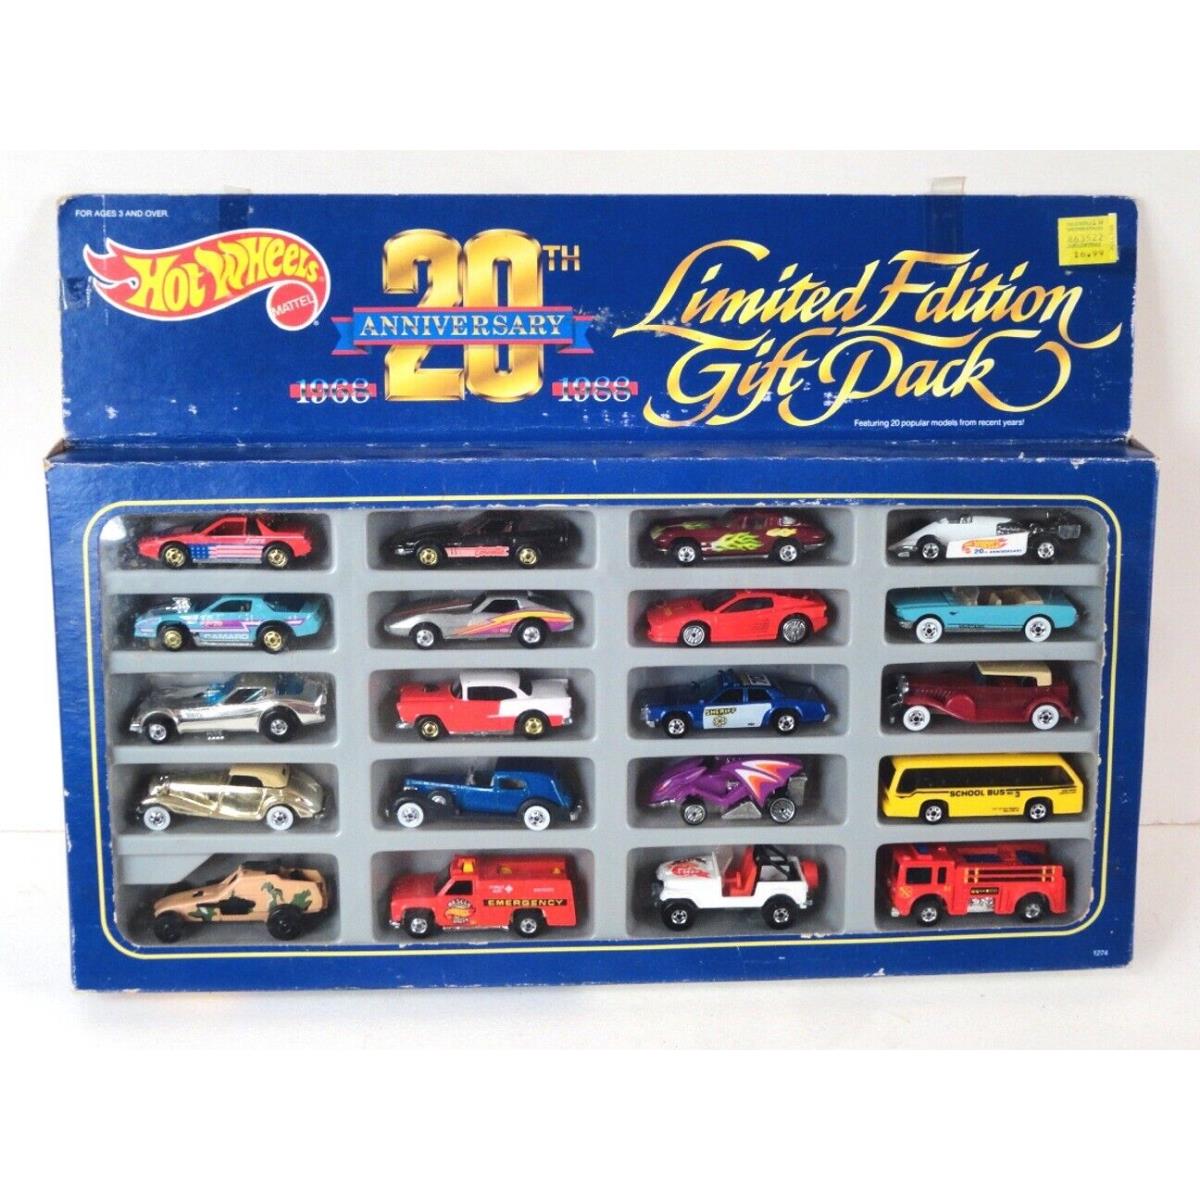 1988 Hot Wheels 20th Anniversary Limited Edition Gift Pack 1968-1988 Vintage